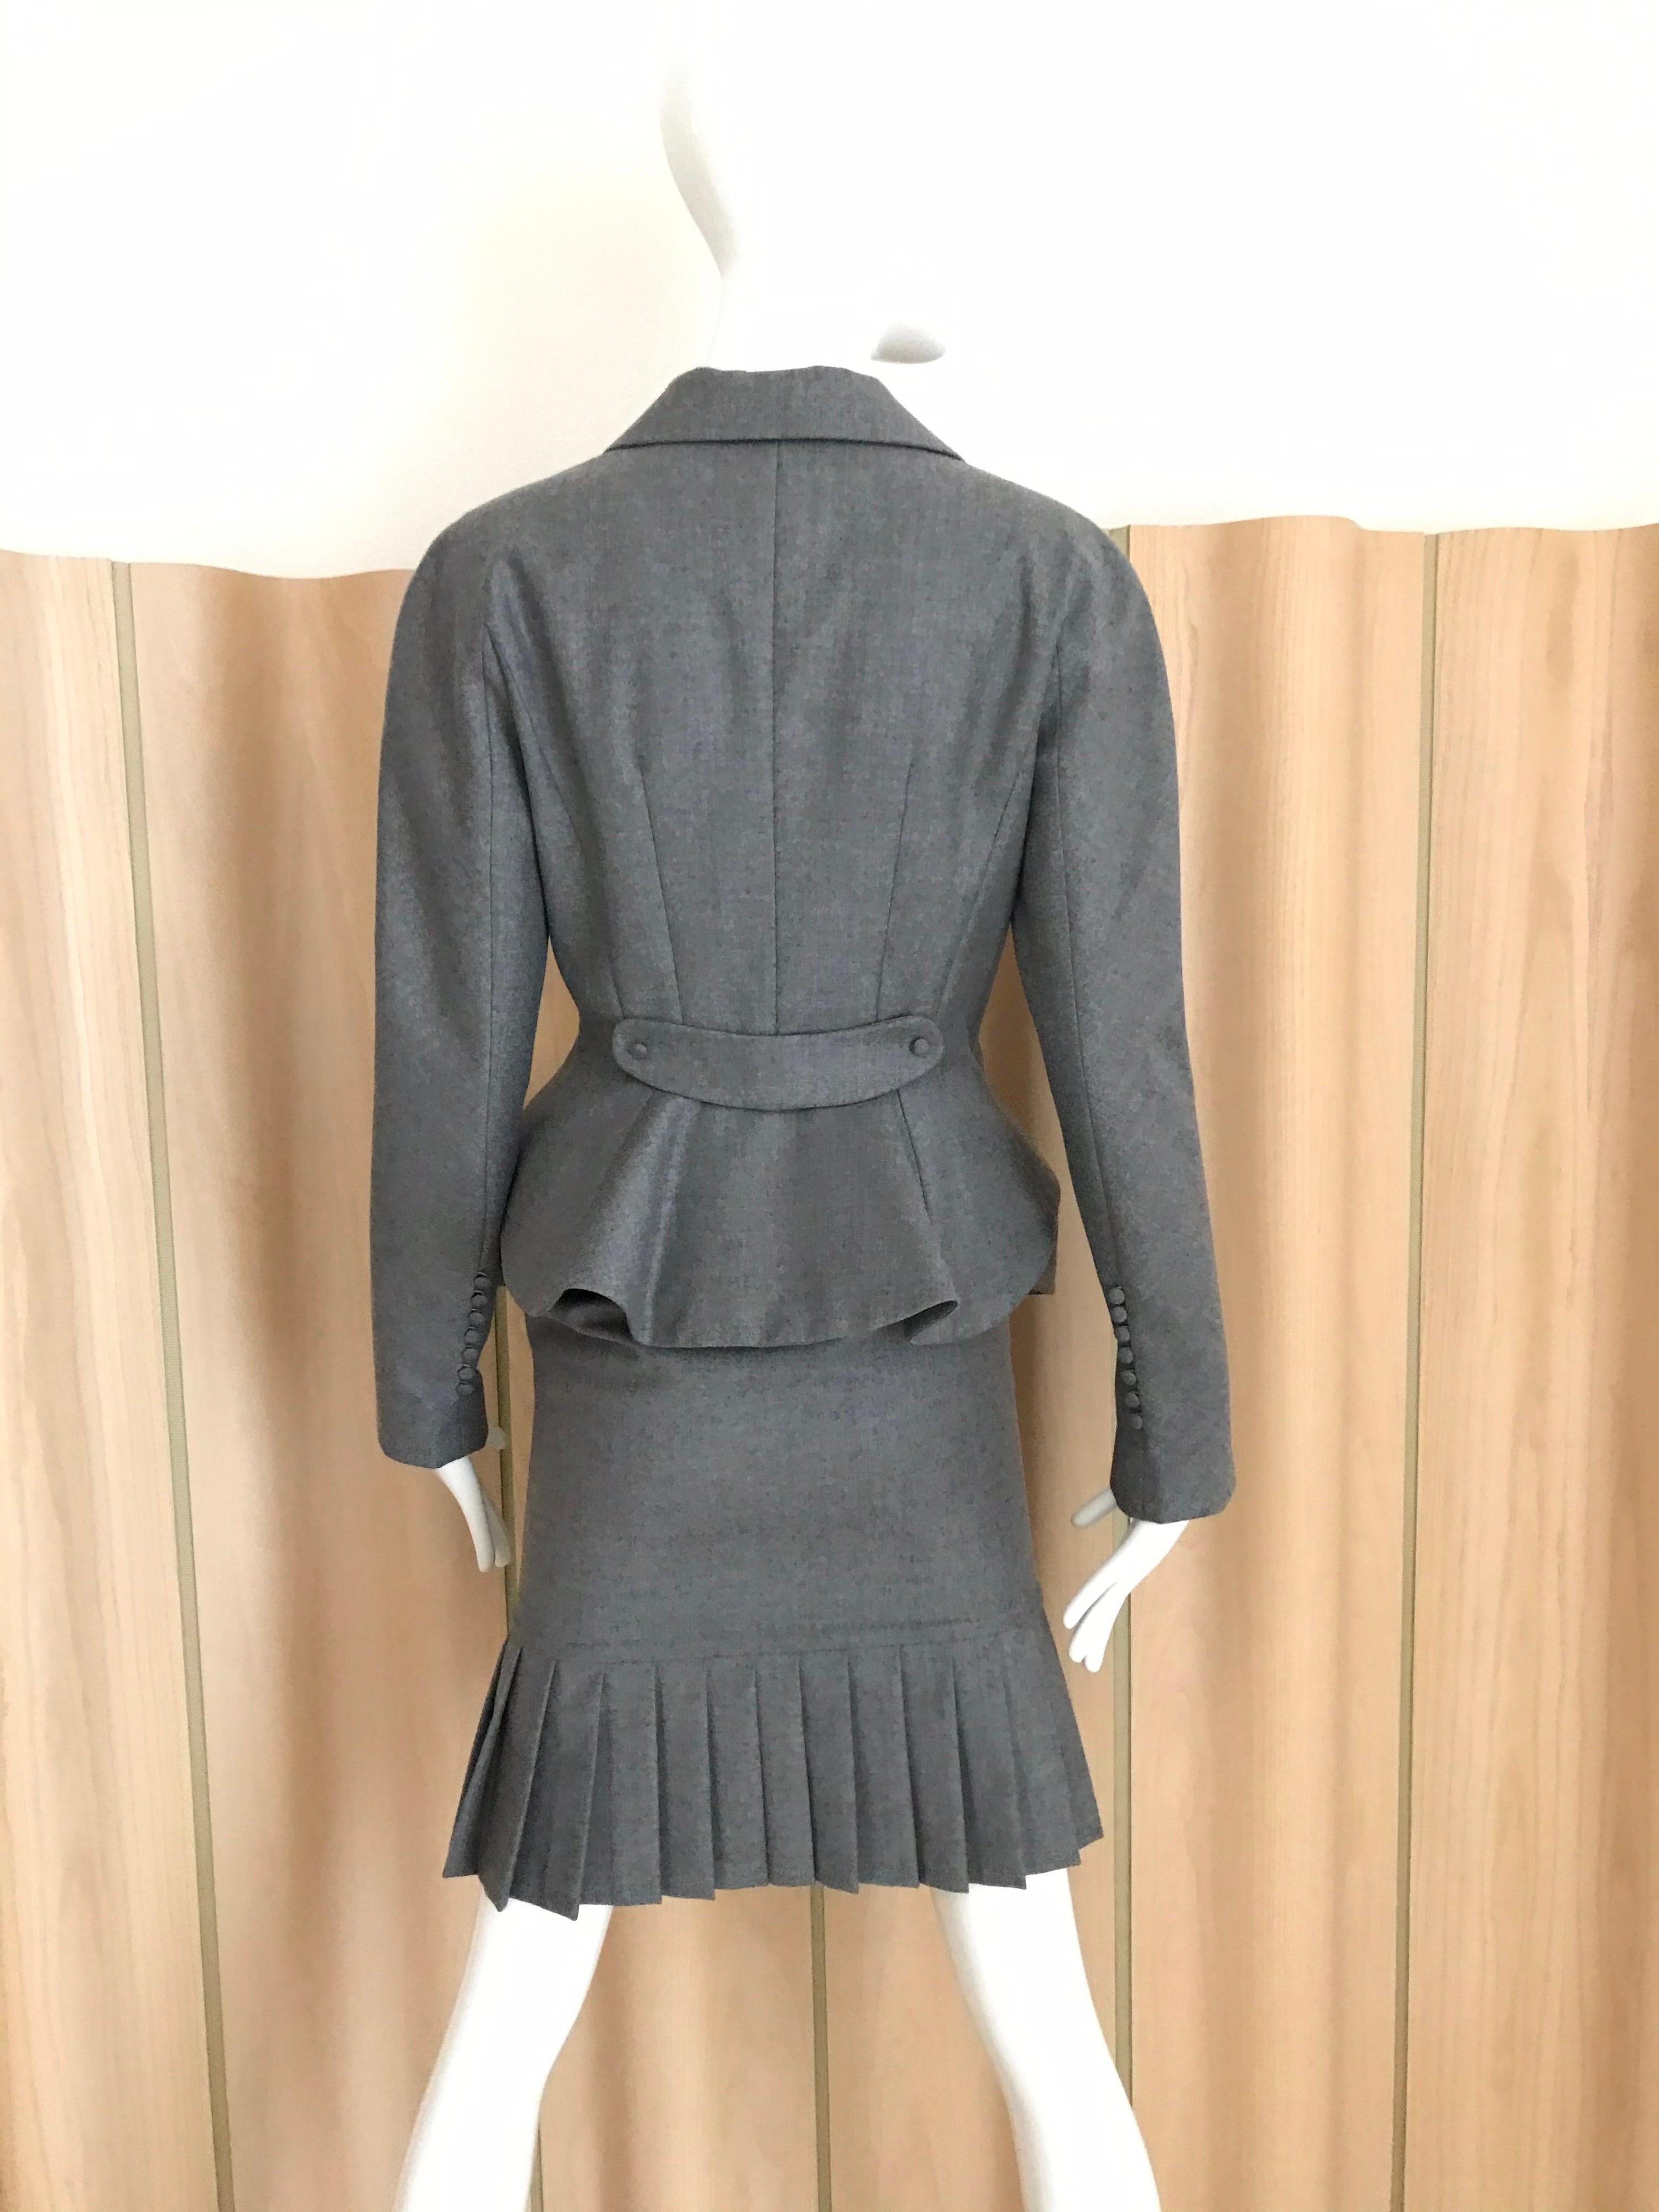 90s John Galliano Grey Cashmere Wool Peplum Suits lined in silk.
Jacket size fit size 4 : Bust: 34 inches/ Waist: 28” / Hip: 32”
Skirt waist: 26 inches/ Hip: 34 inches/ Skirt length: 28.5”